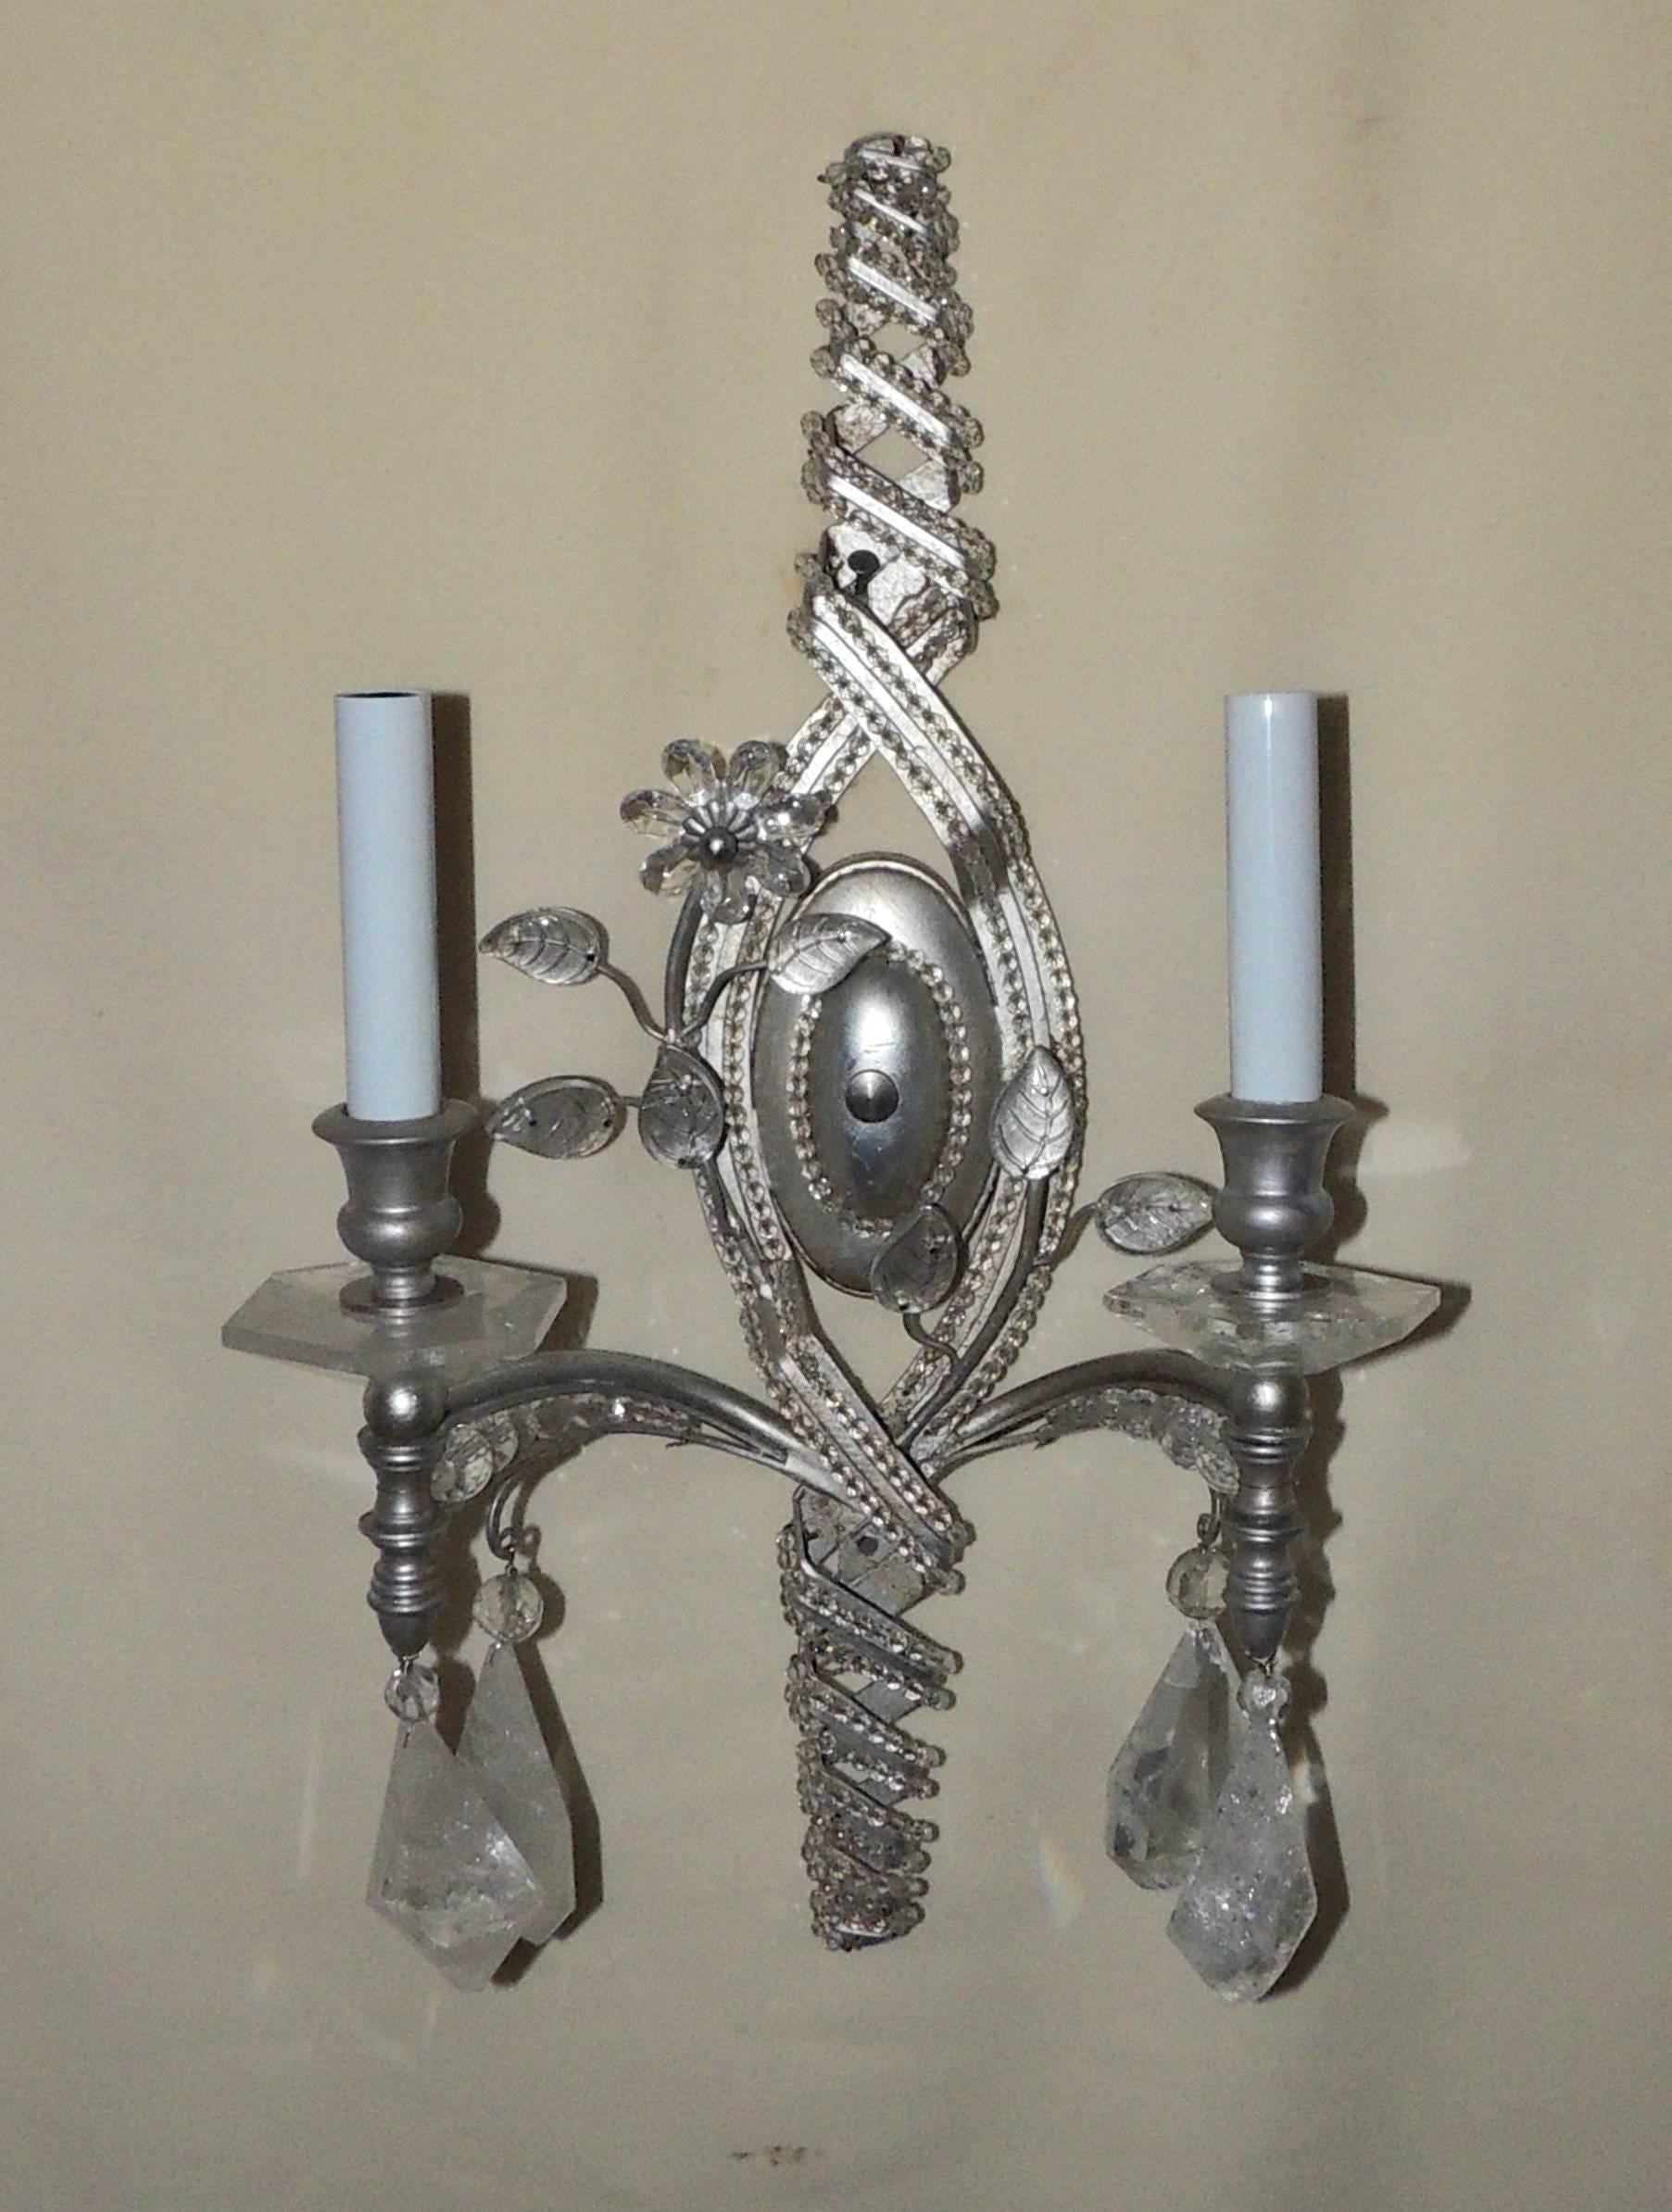 Elegant pair of transitional silver sconces with rock crystal bobeches and pendants and crystal beads throughout these two-arm sconces.

Measures: 20